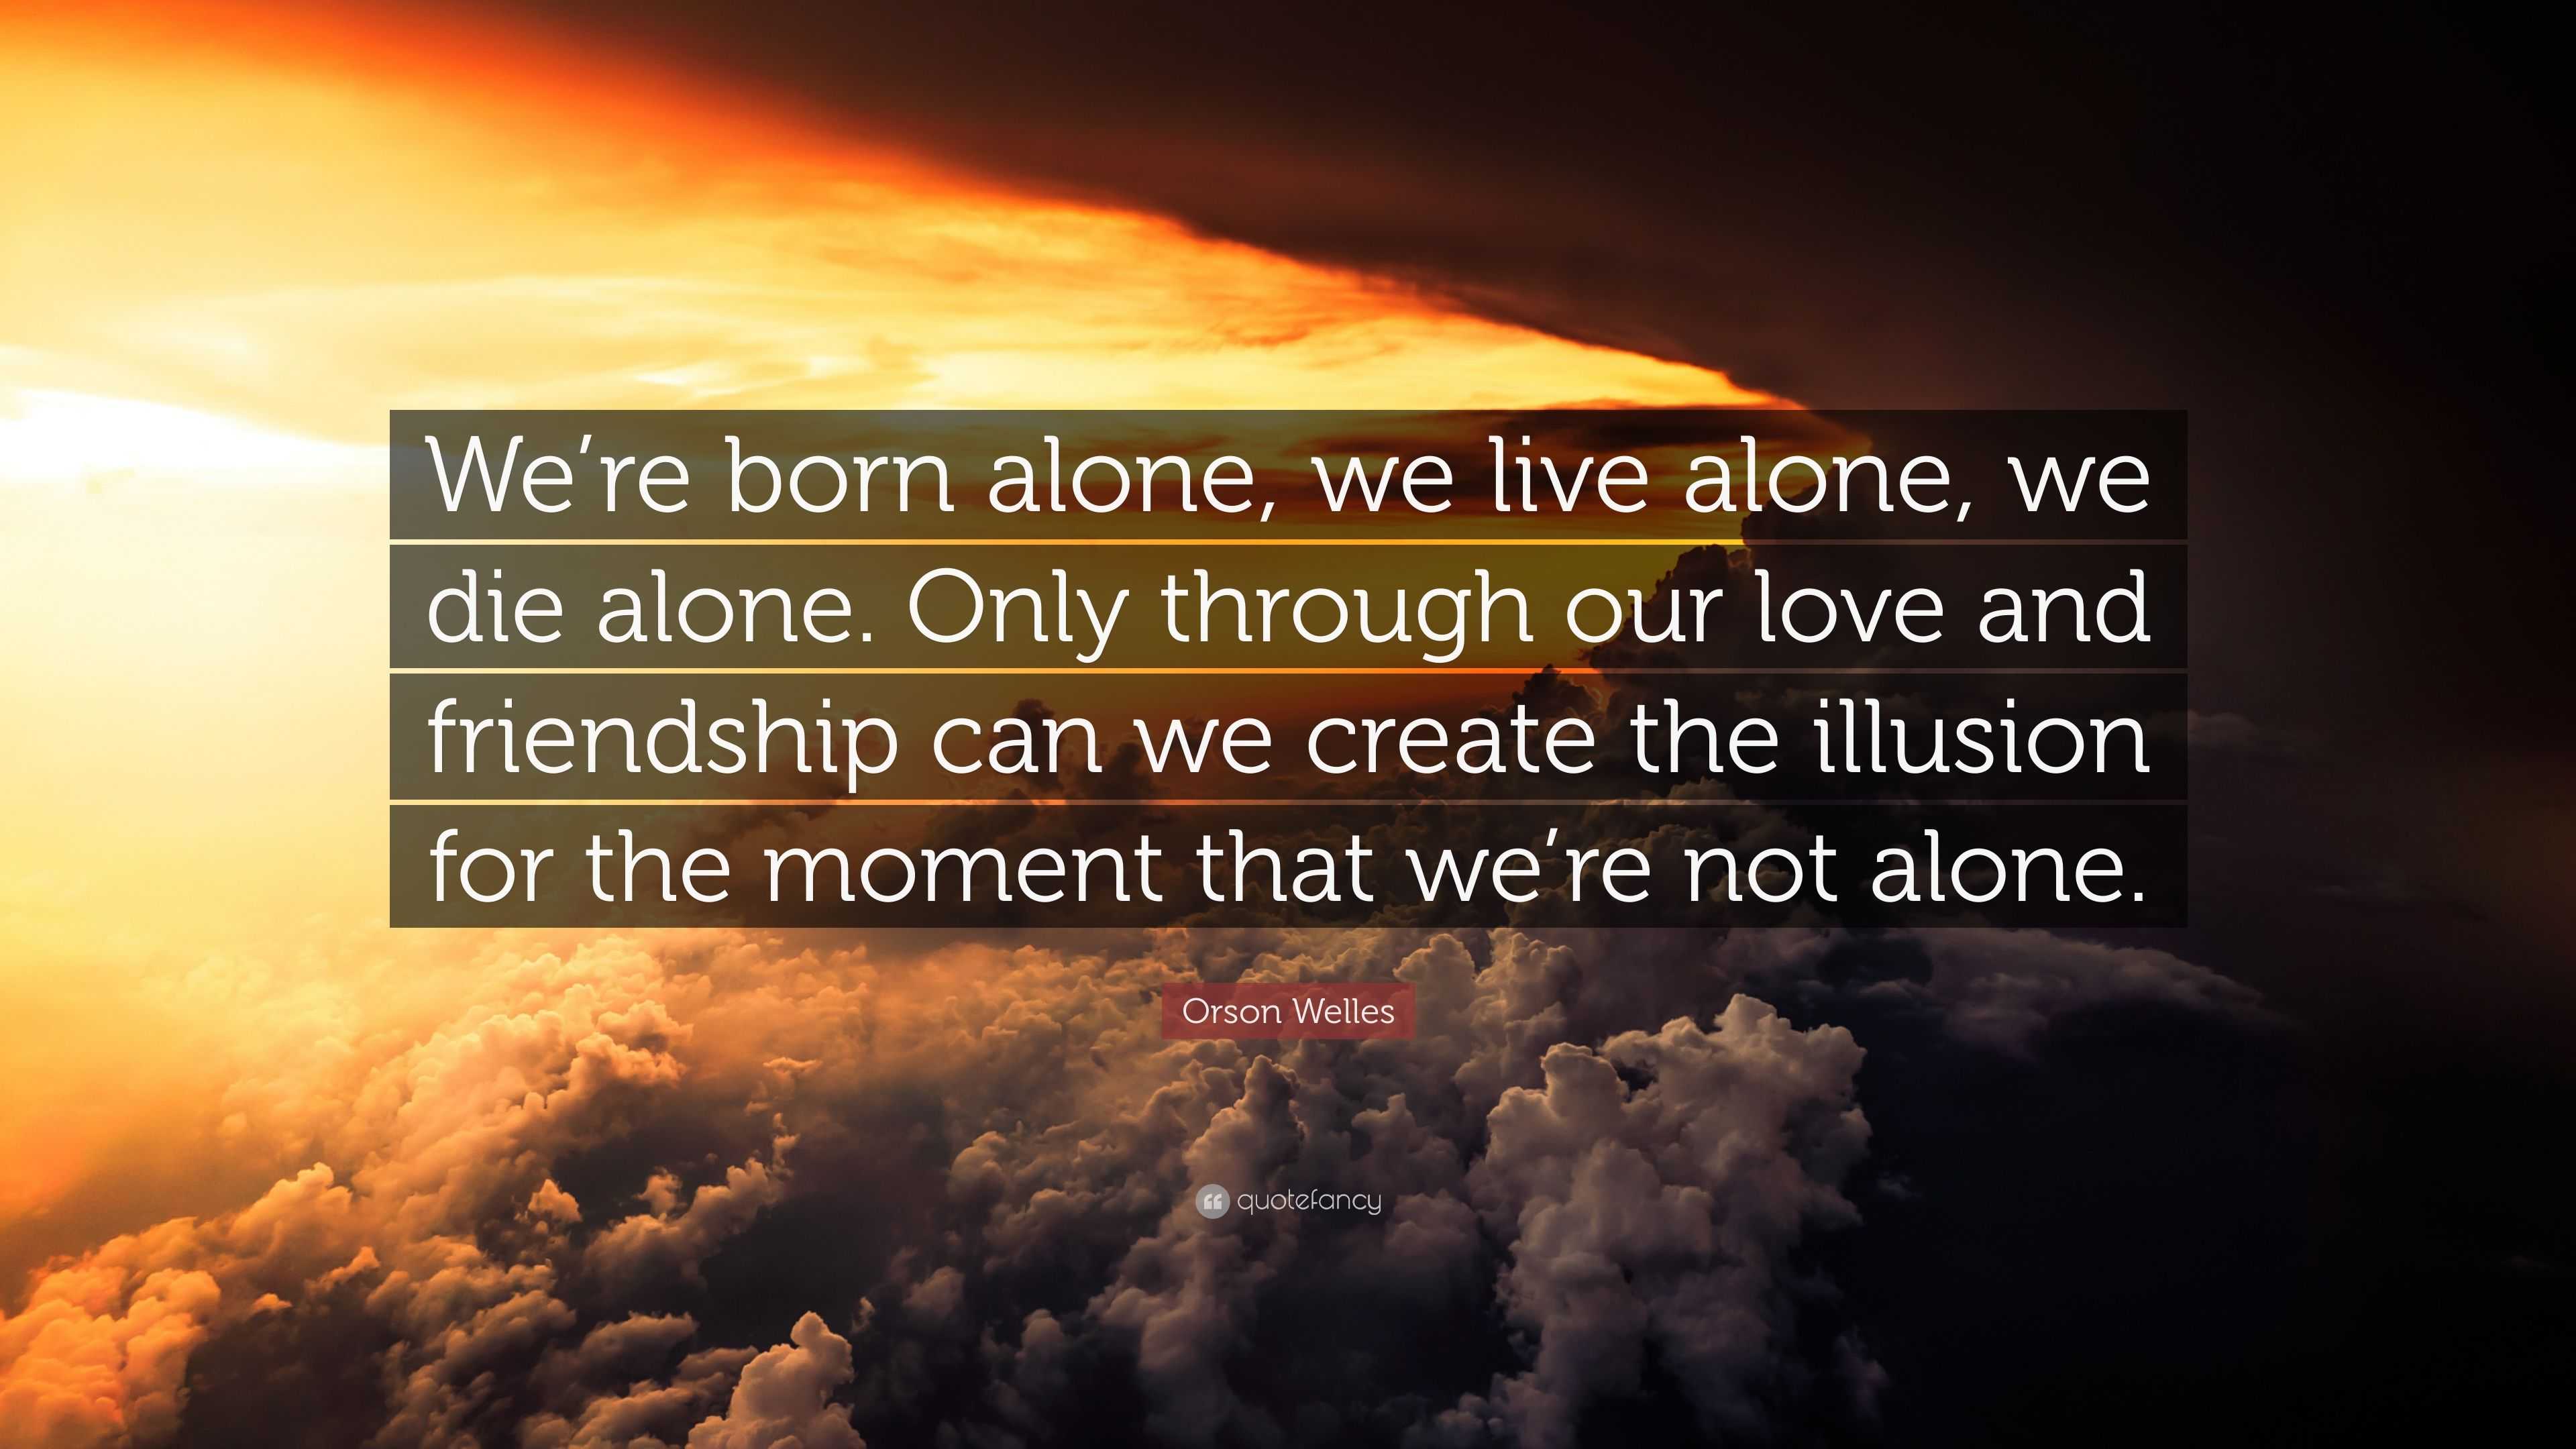 Orson Welles Quote: “We’re born alone, we live alone, we die alone ...